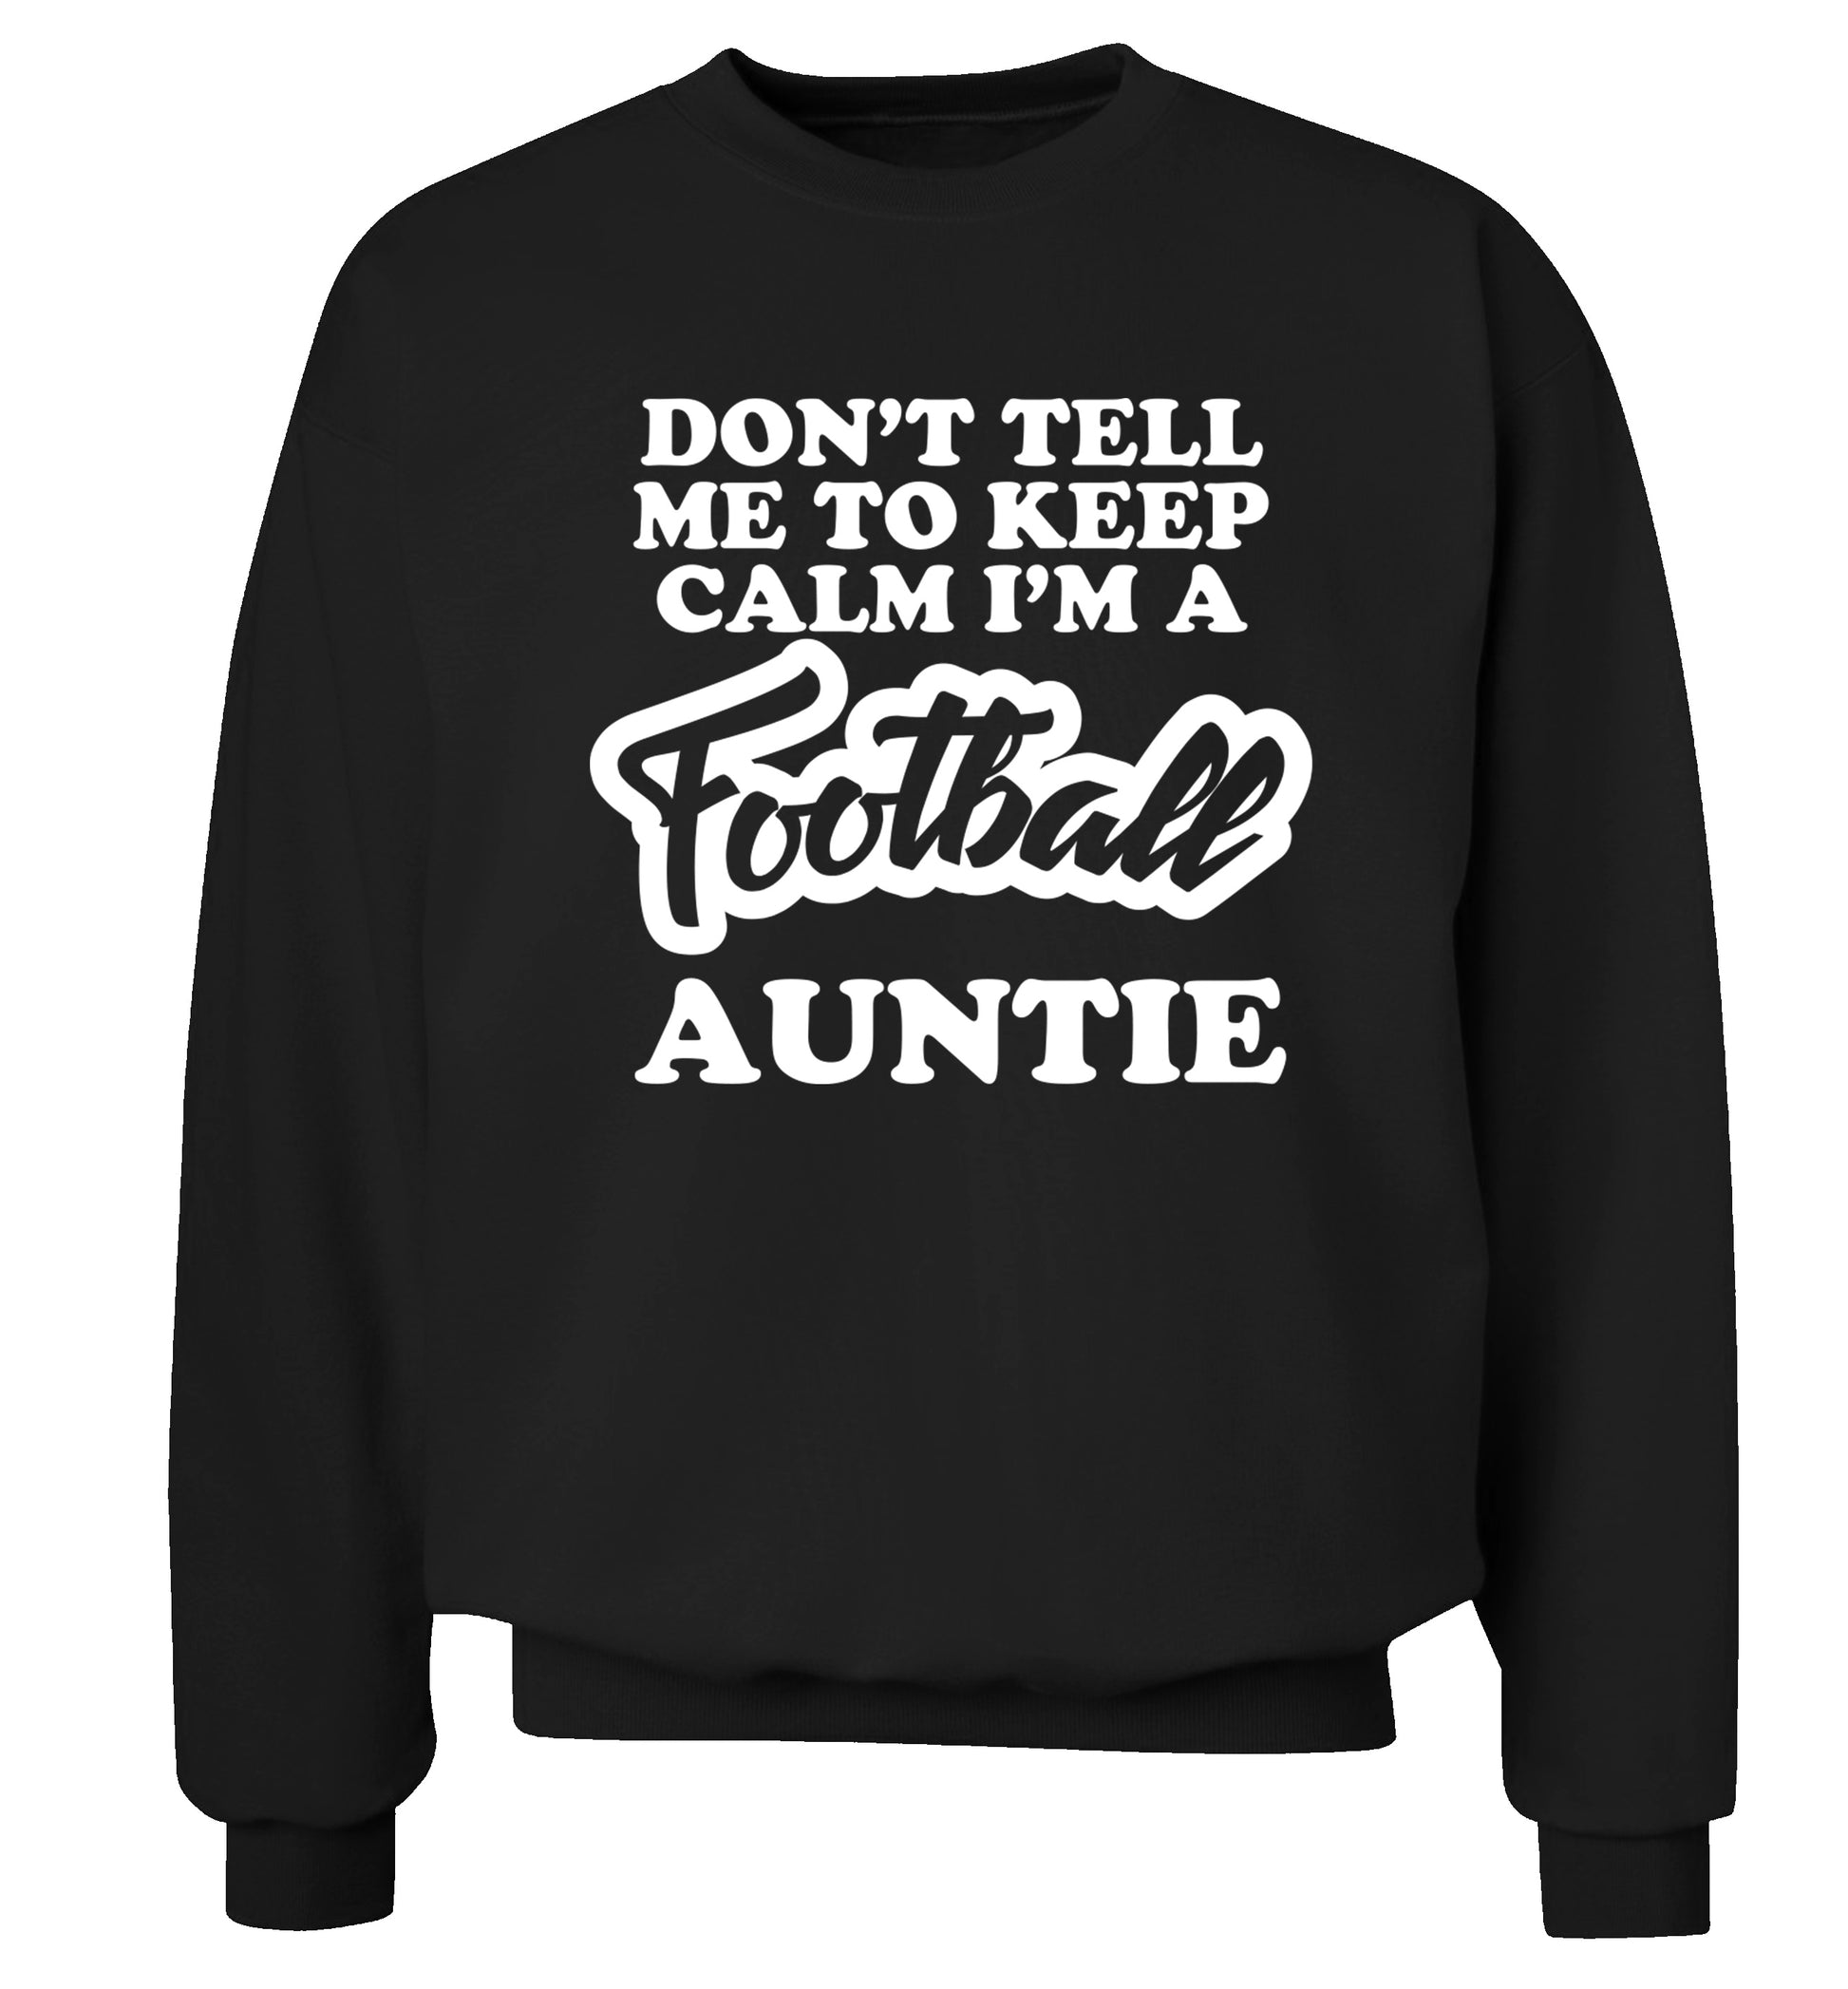 Don't tell me to keep calm I'm a football auntie Adult's unisexblack Sweater 2XL